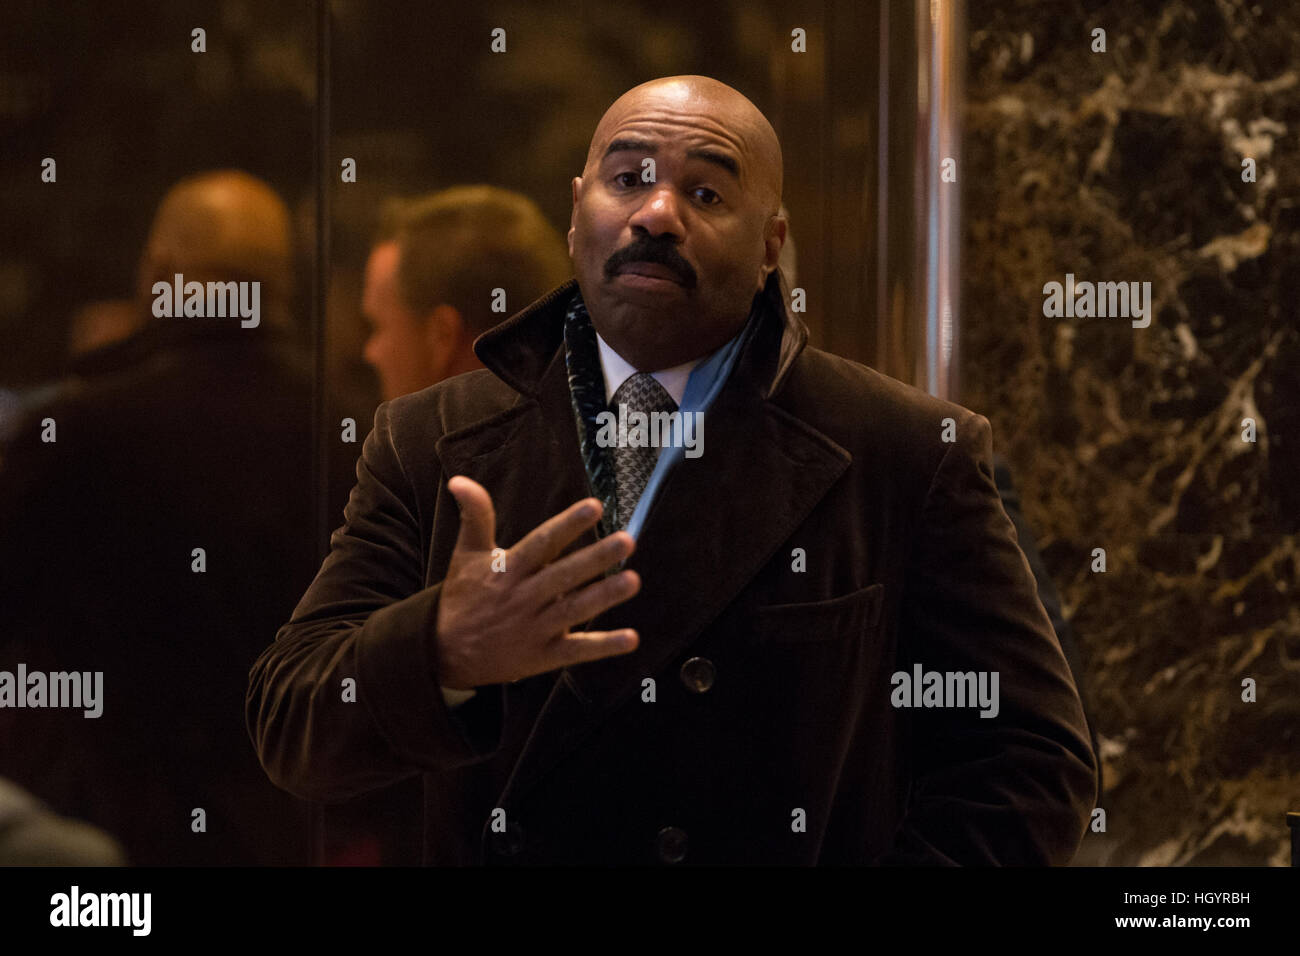 New York, USA. 13th Jan, 2017. Media host Steve Harvey arrives for a meeting with President-elect Donald Trump at Trump Tower in New York, USA. Credit: MediaPunch Inc/Alamy Live News Stock Photo